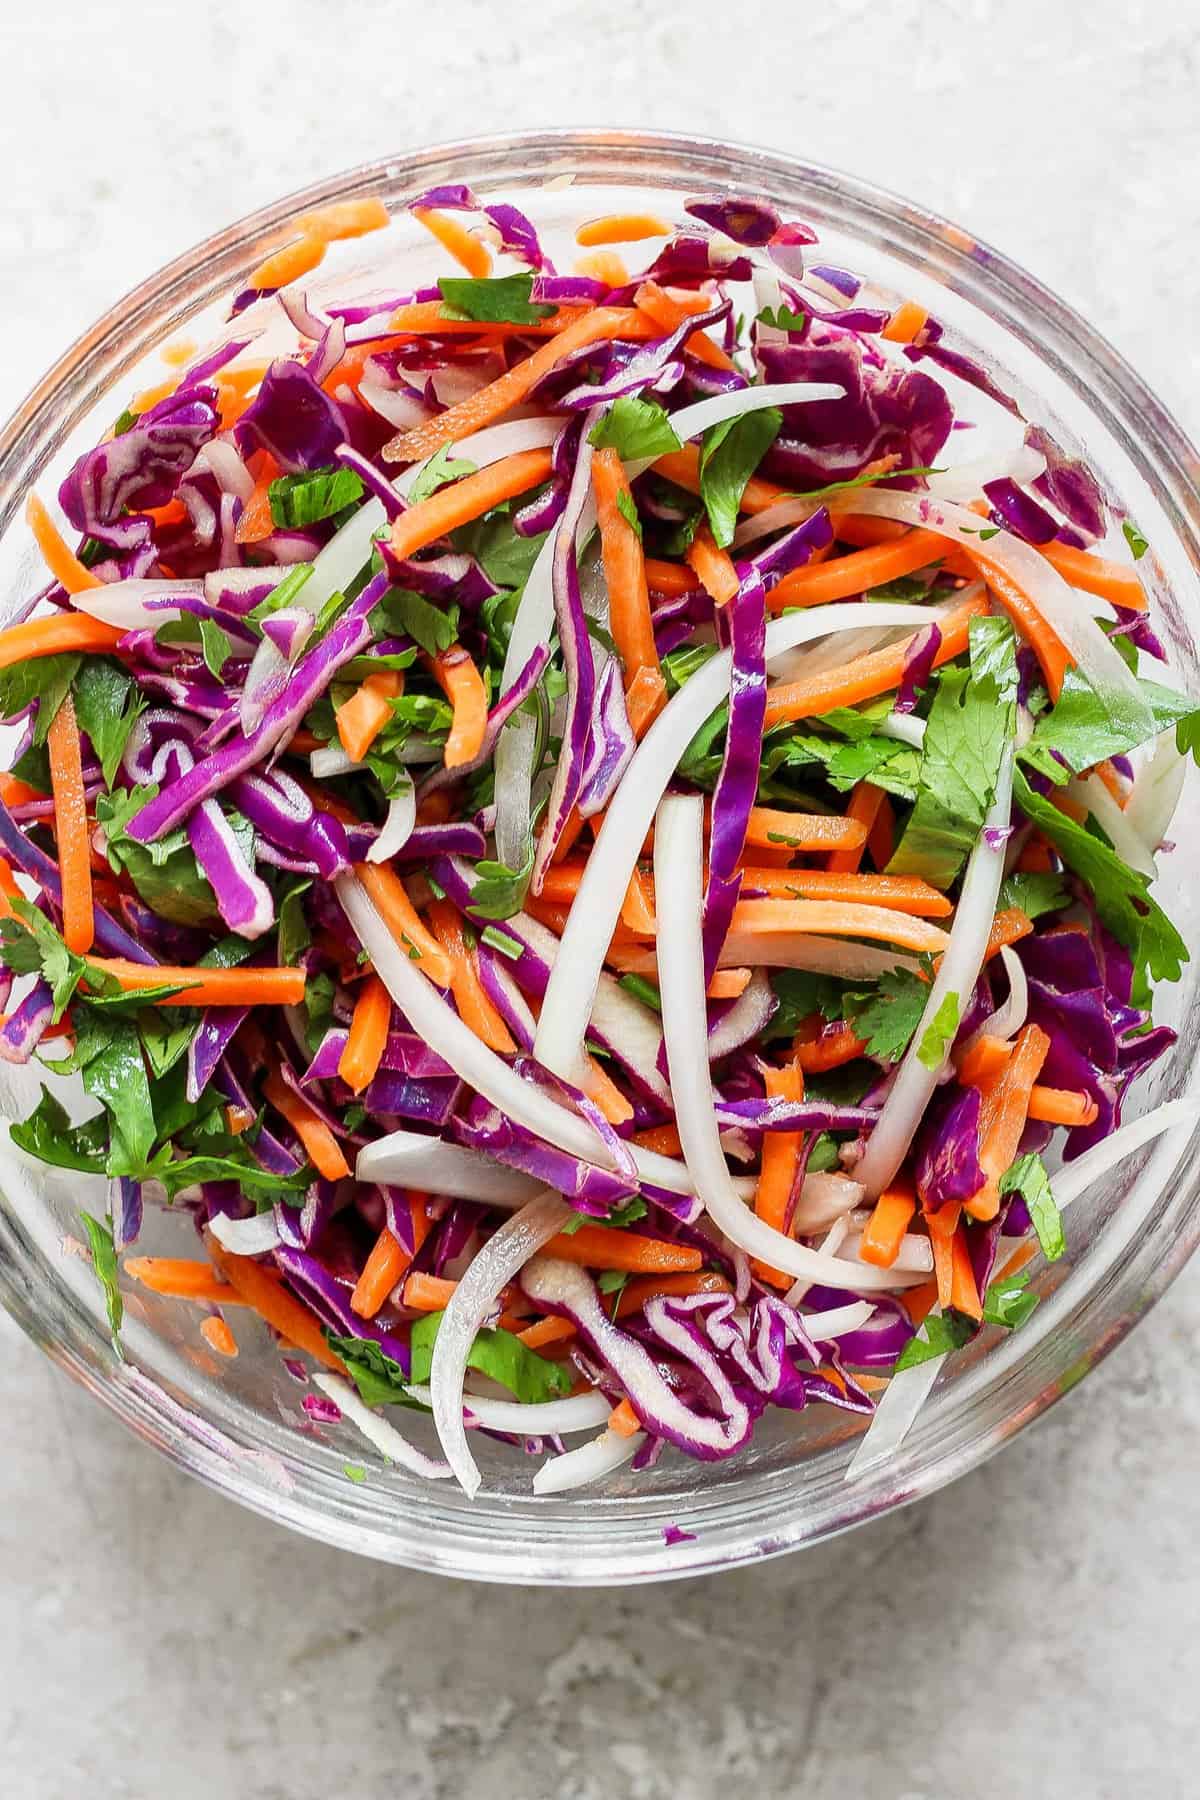 A colorful salad with red cabbage, carrots, onions, and parsley in a clear bowl on a white background.